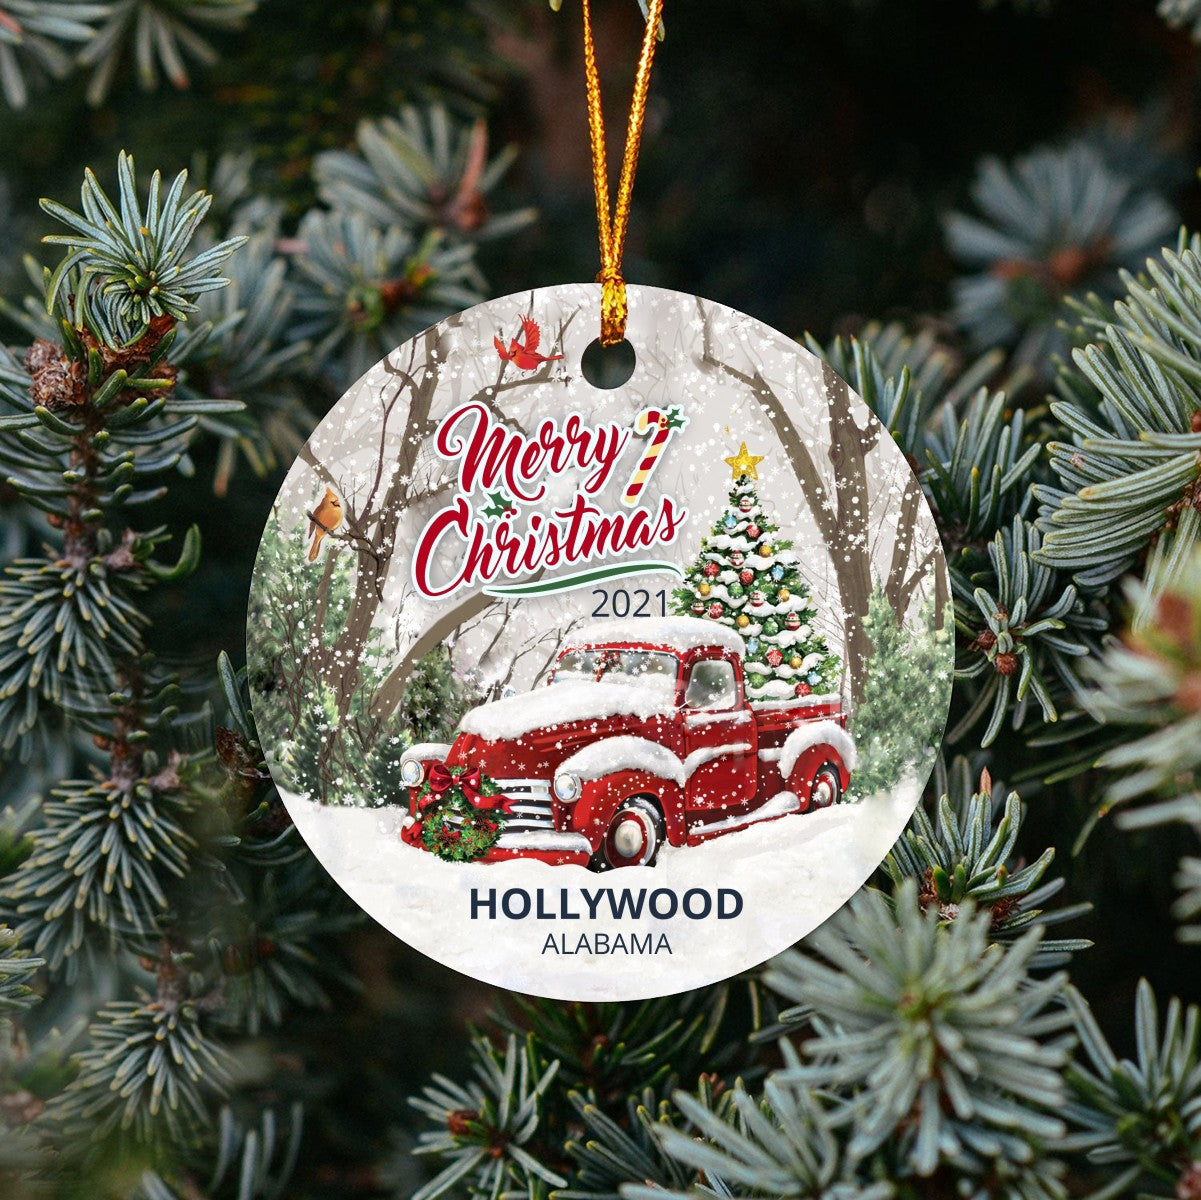 Christmas Tree Ornaments Hollywood - Ornament With Name City, State Hollywood Alabama AL Ornament - Red Truck Xmas Ornaments 3'' Plastic Gift For Family, Friend And Housewarming